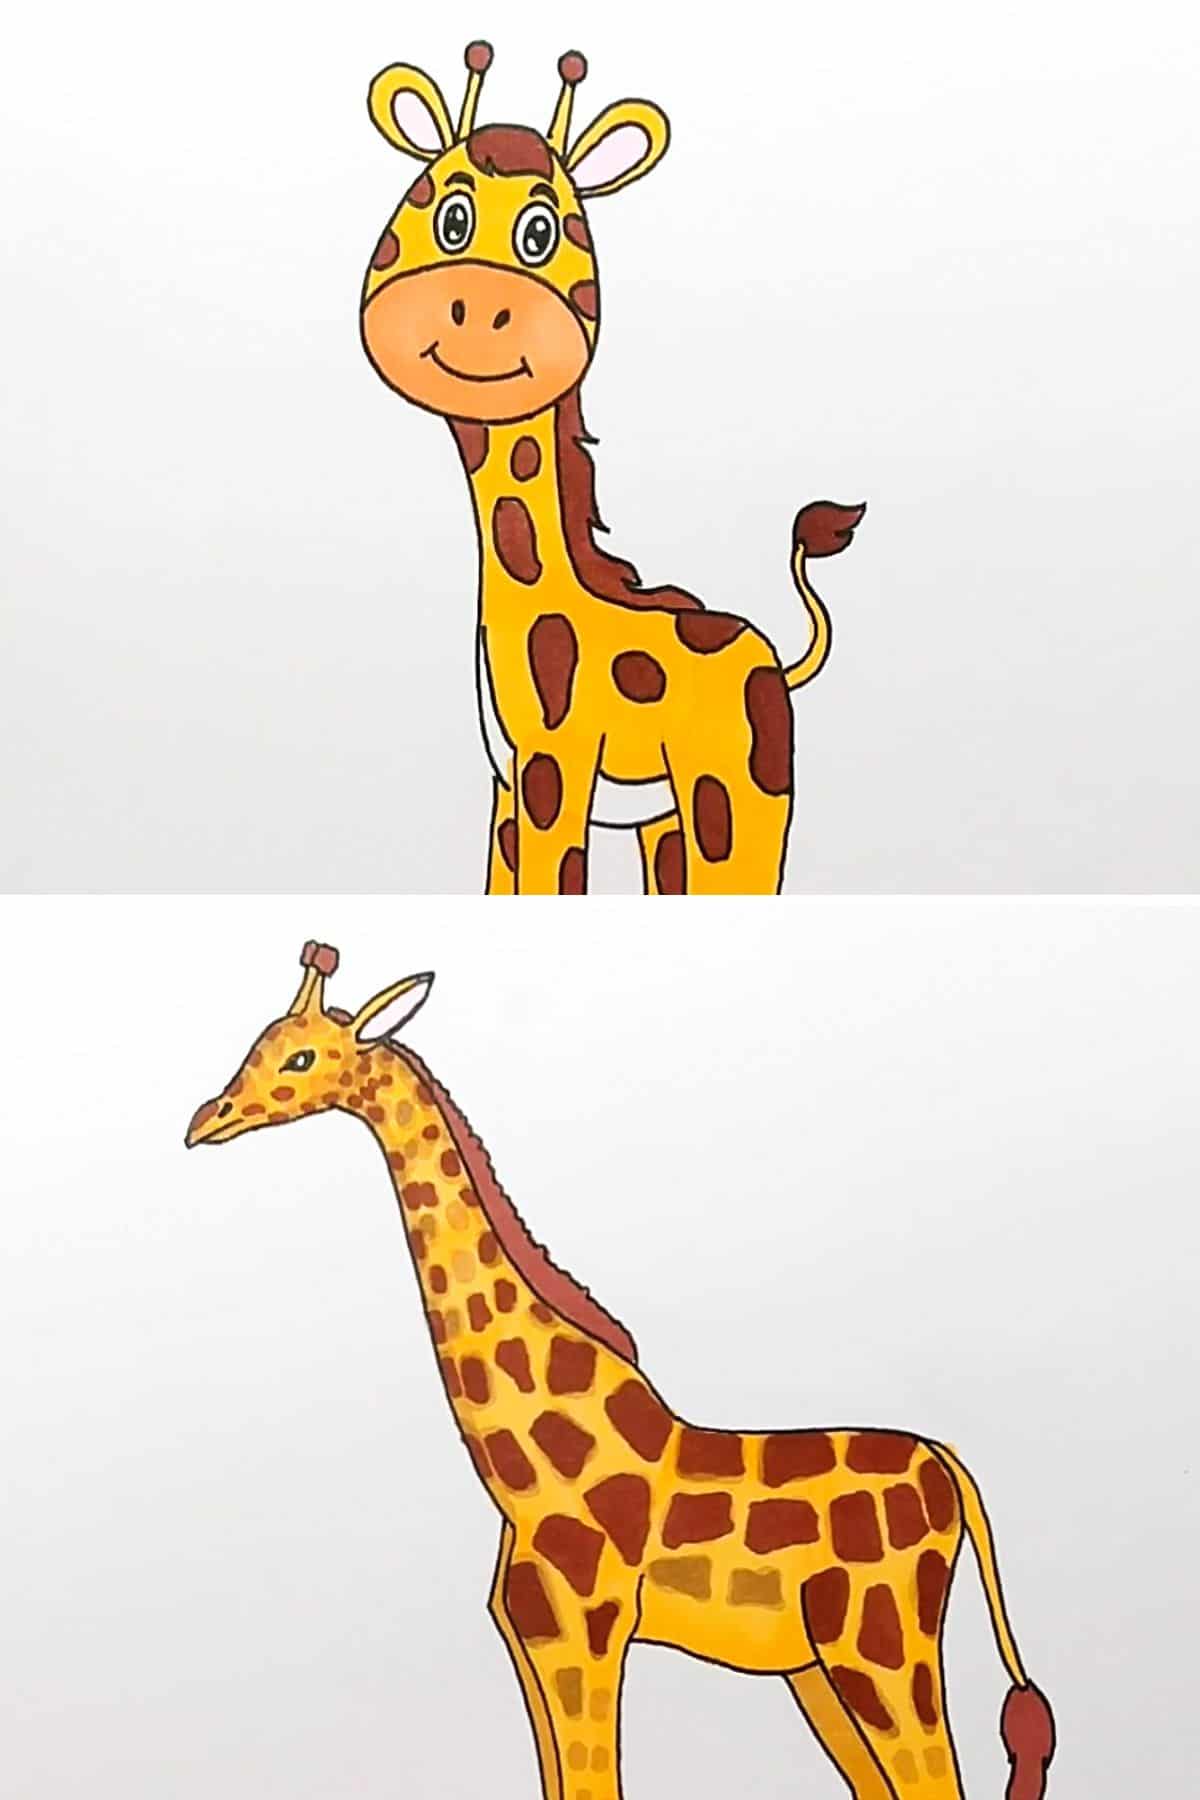 Skip to my Lou - How to Draw a Giraffe - The finished cartoon and realistic giraffe drawings. 